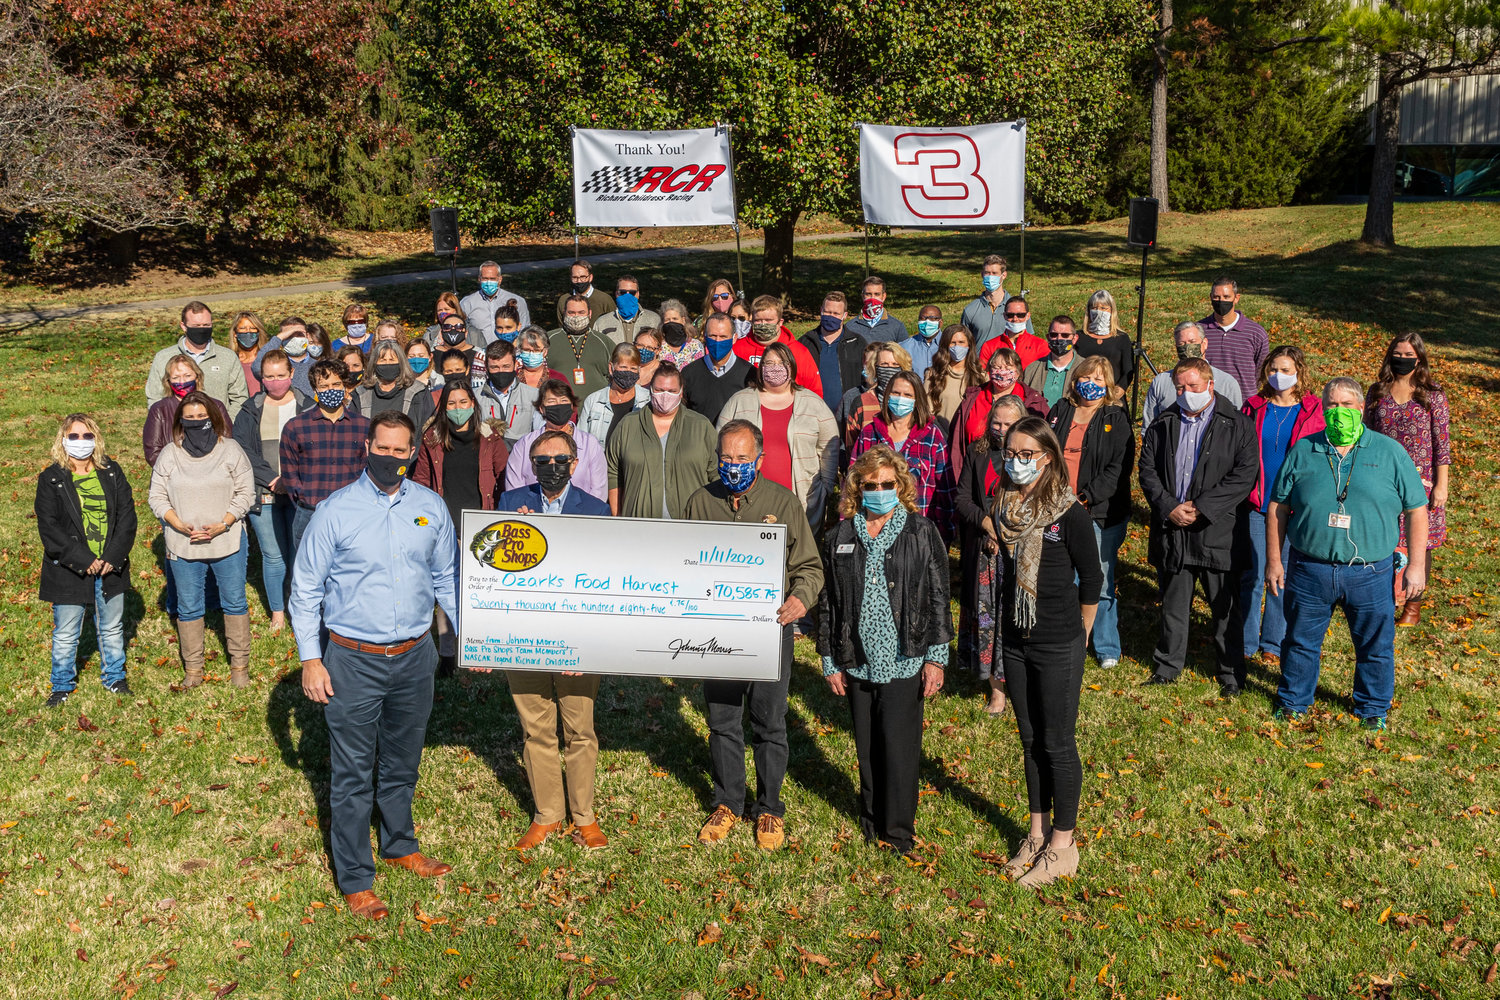 Ozarks Food Harvest representatives receive a $70,500 check from Bass Pro Shops founder and CEO Johnny Morris and Bass Pro team members.